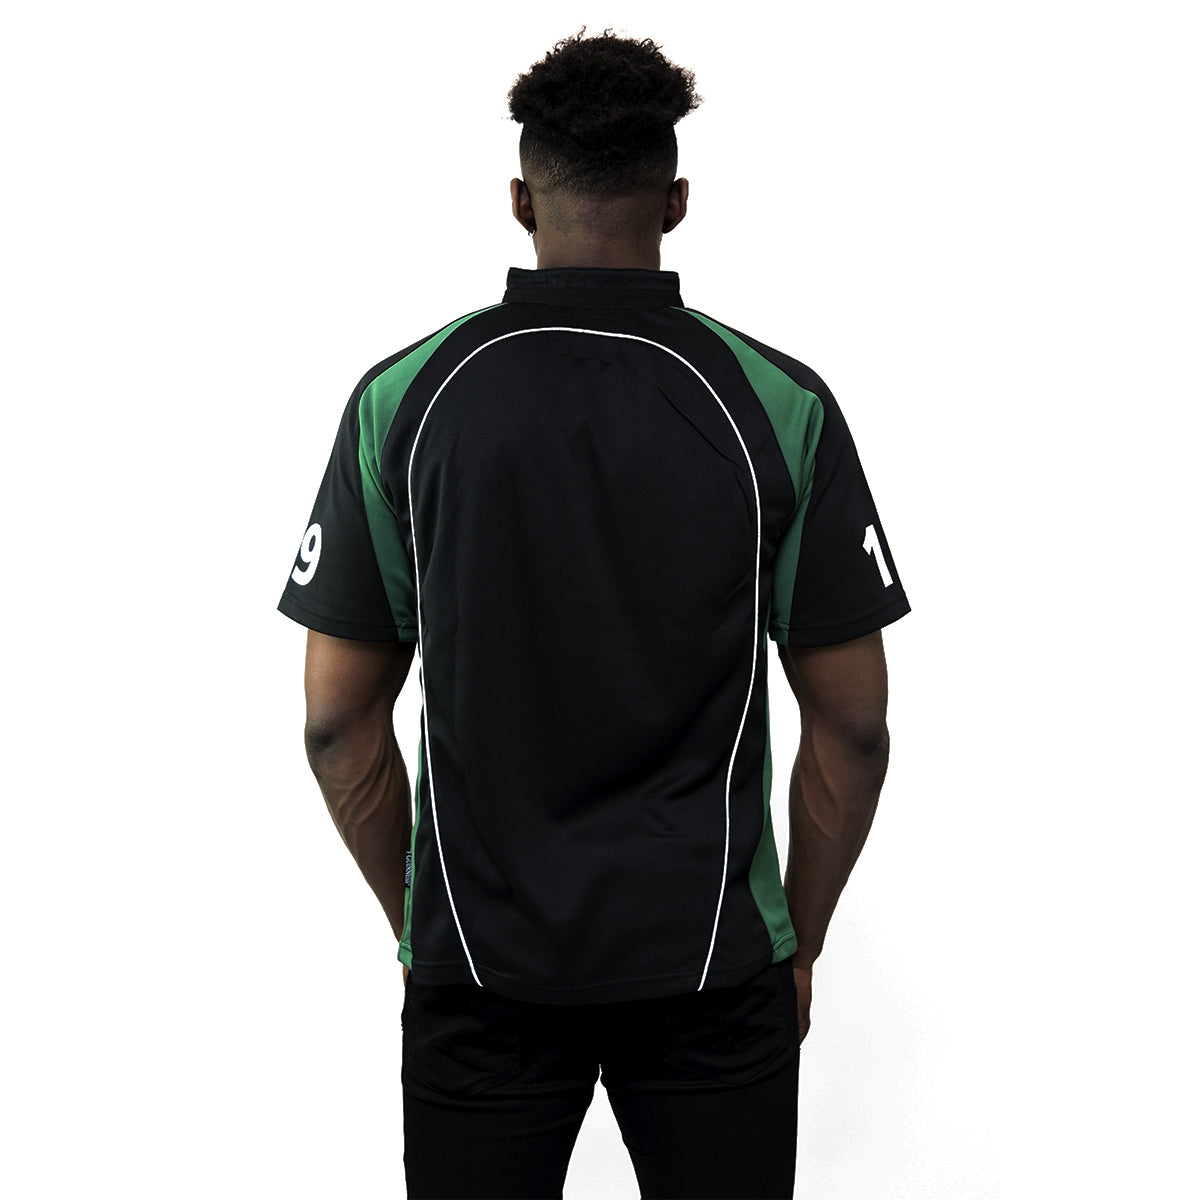 The back of a man wearing a Guinness Short Sleeve Performance Rugby Jersey.